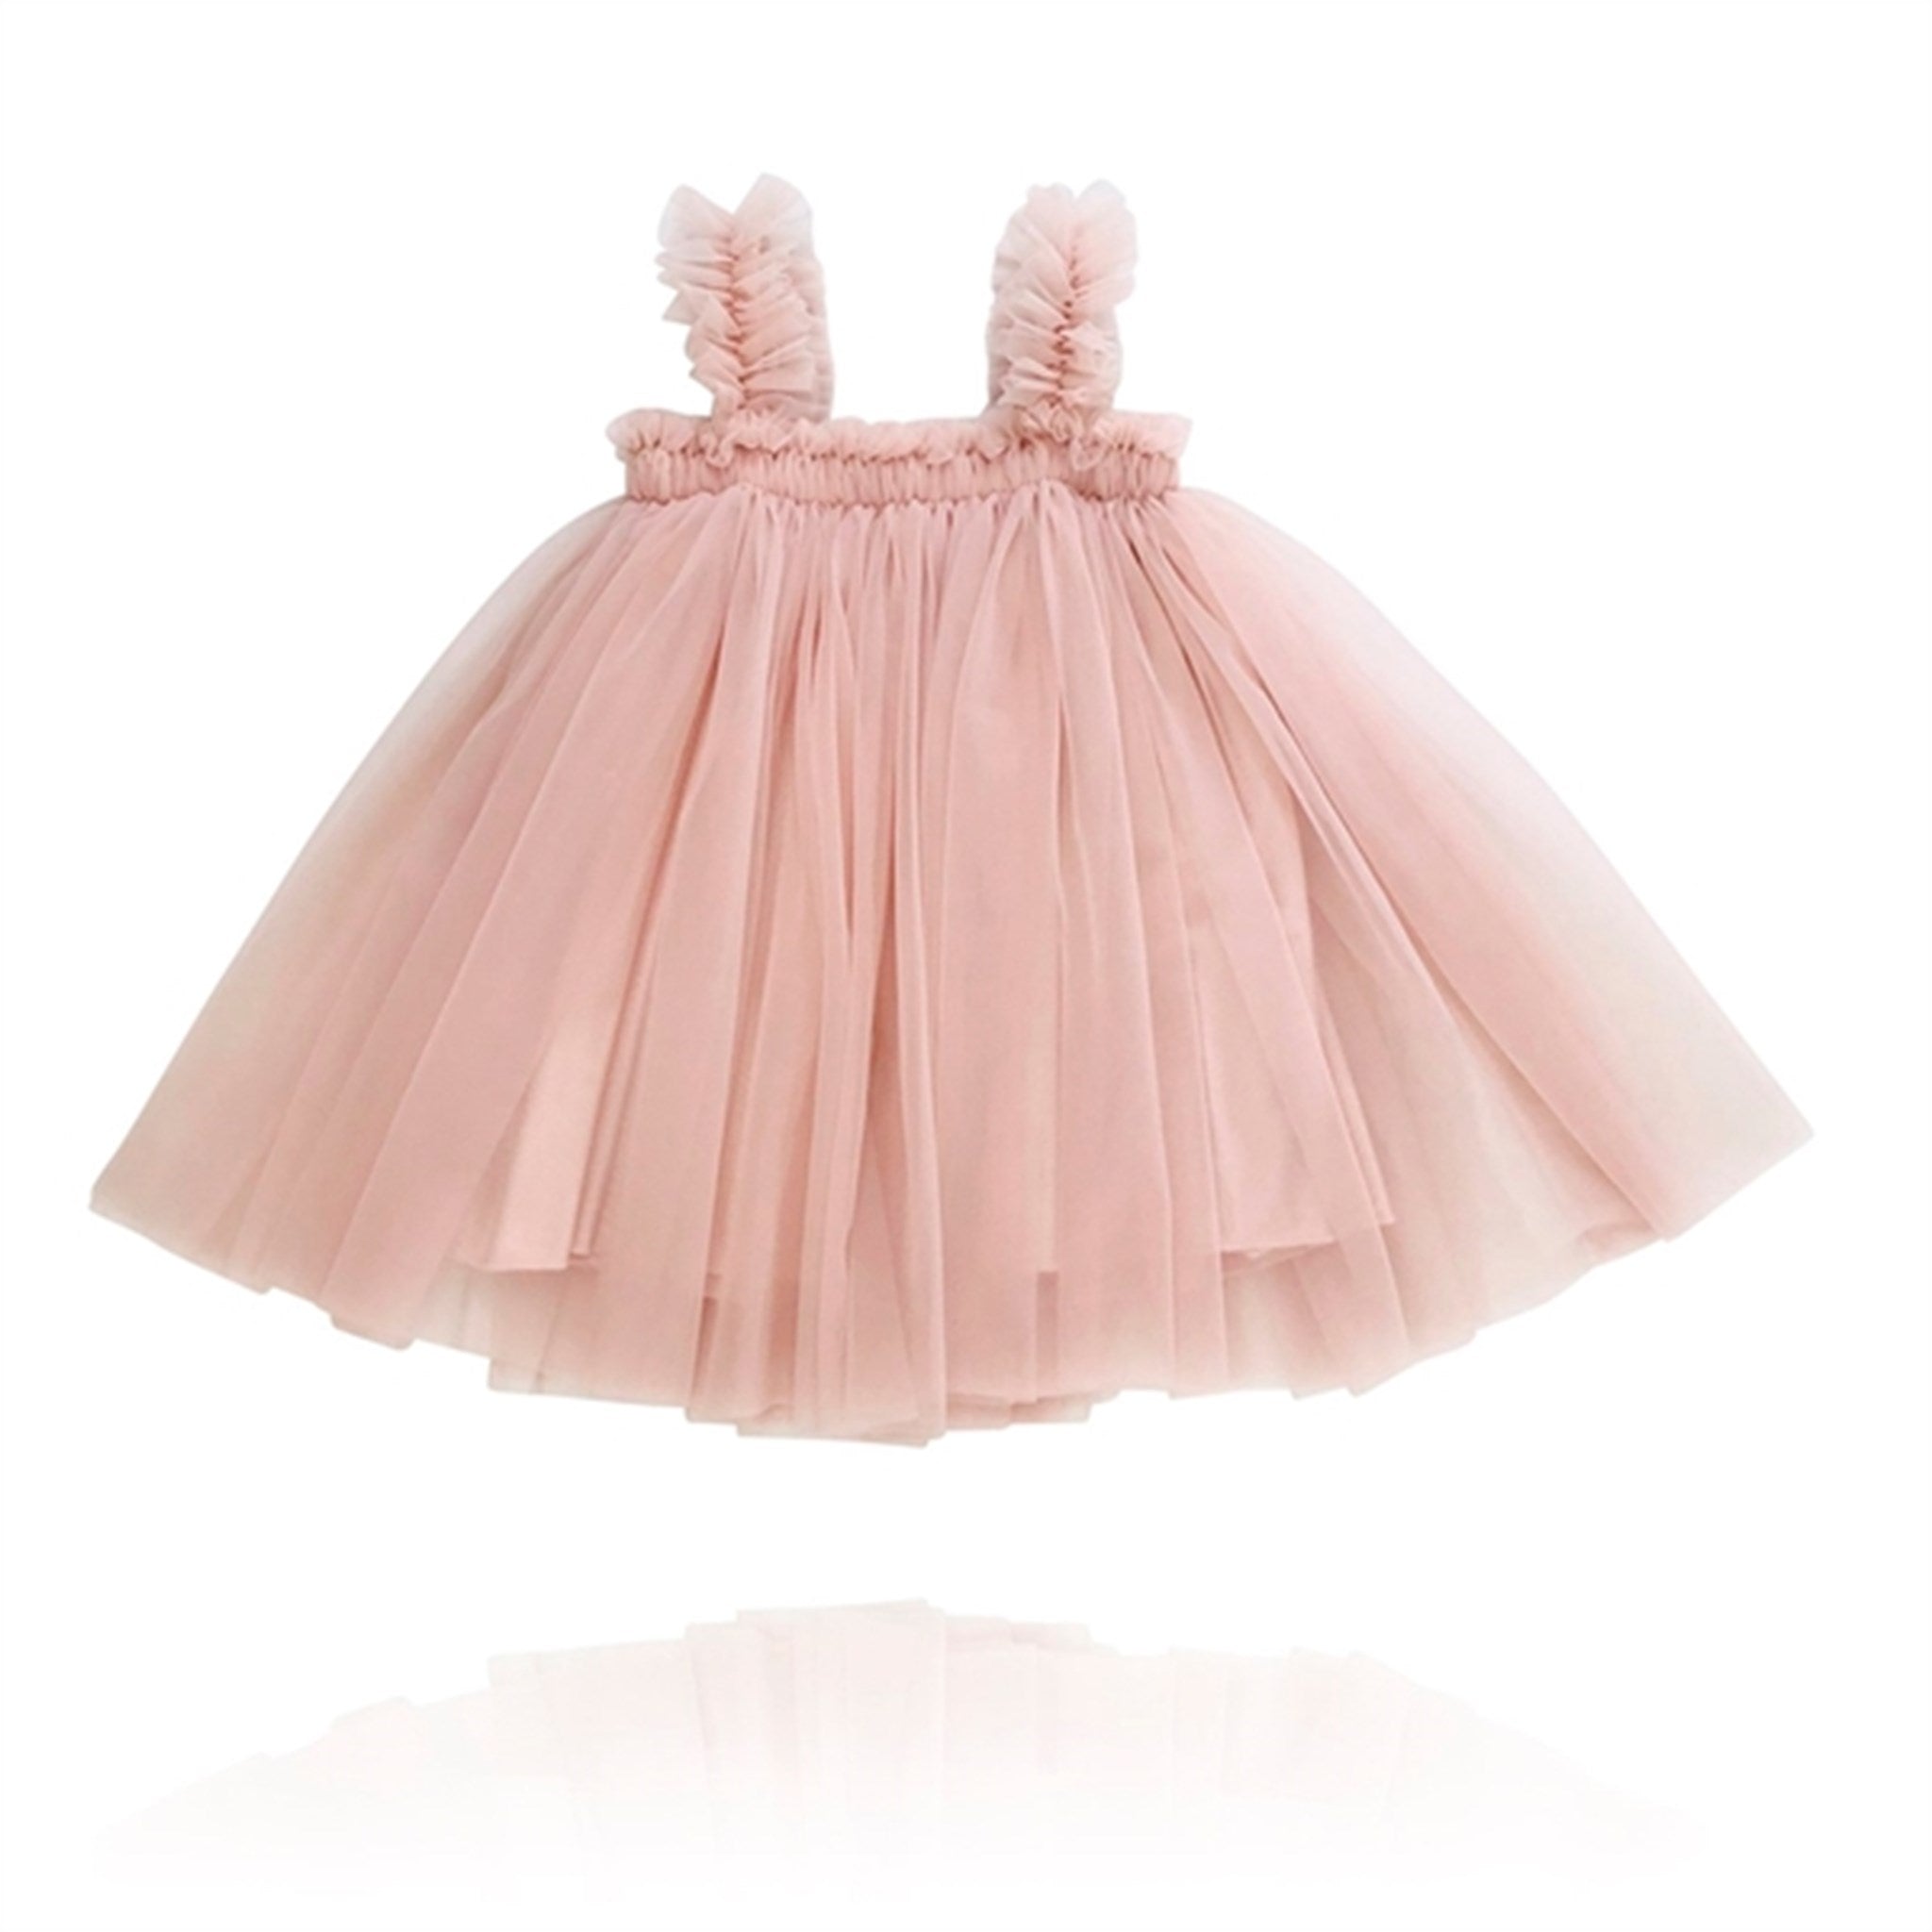 Dolly by Le Petit Tom Tutu Dress Beach Cover Up Ballet Pink